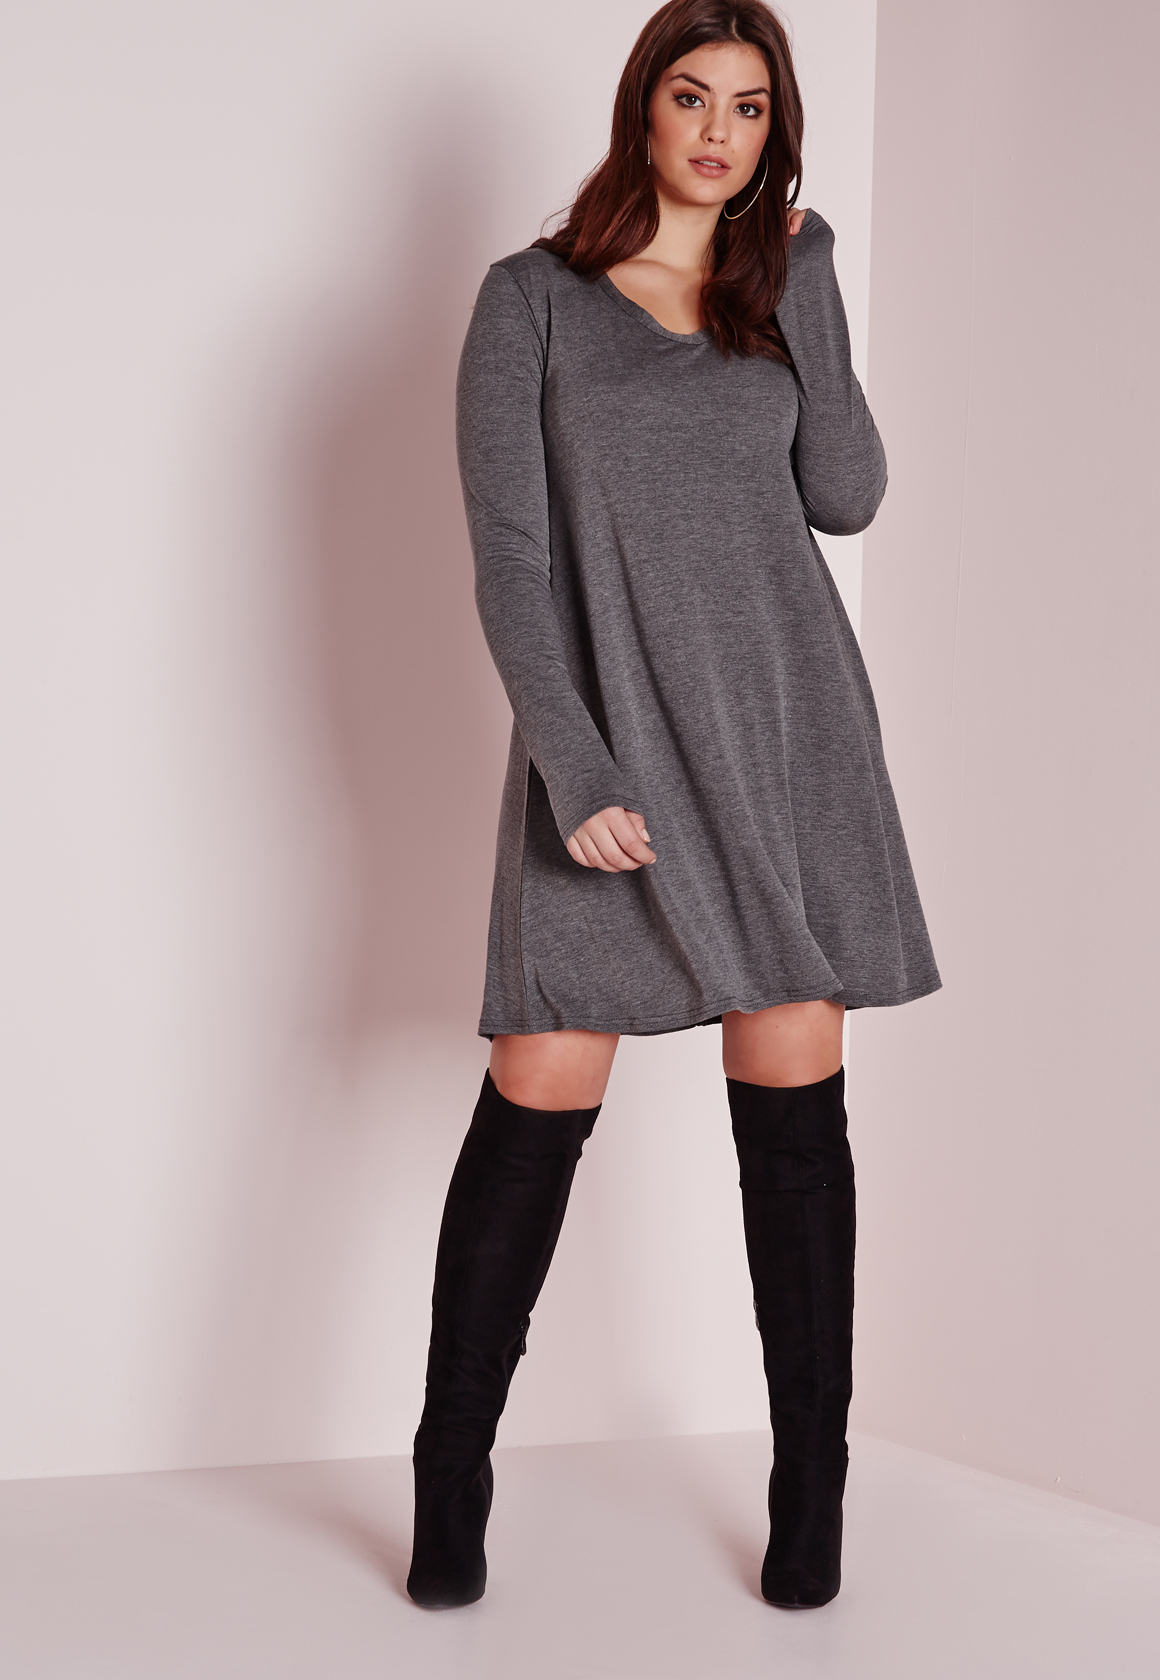 Lyst - Missguided Plus Size V Neck Swing Dress Grey in Gray